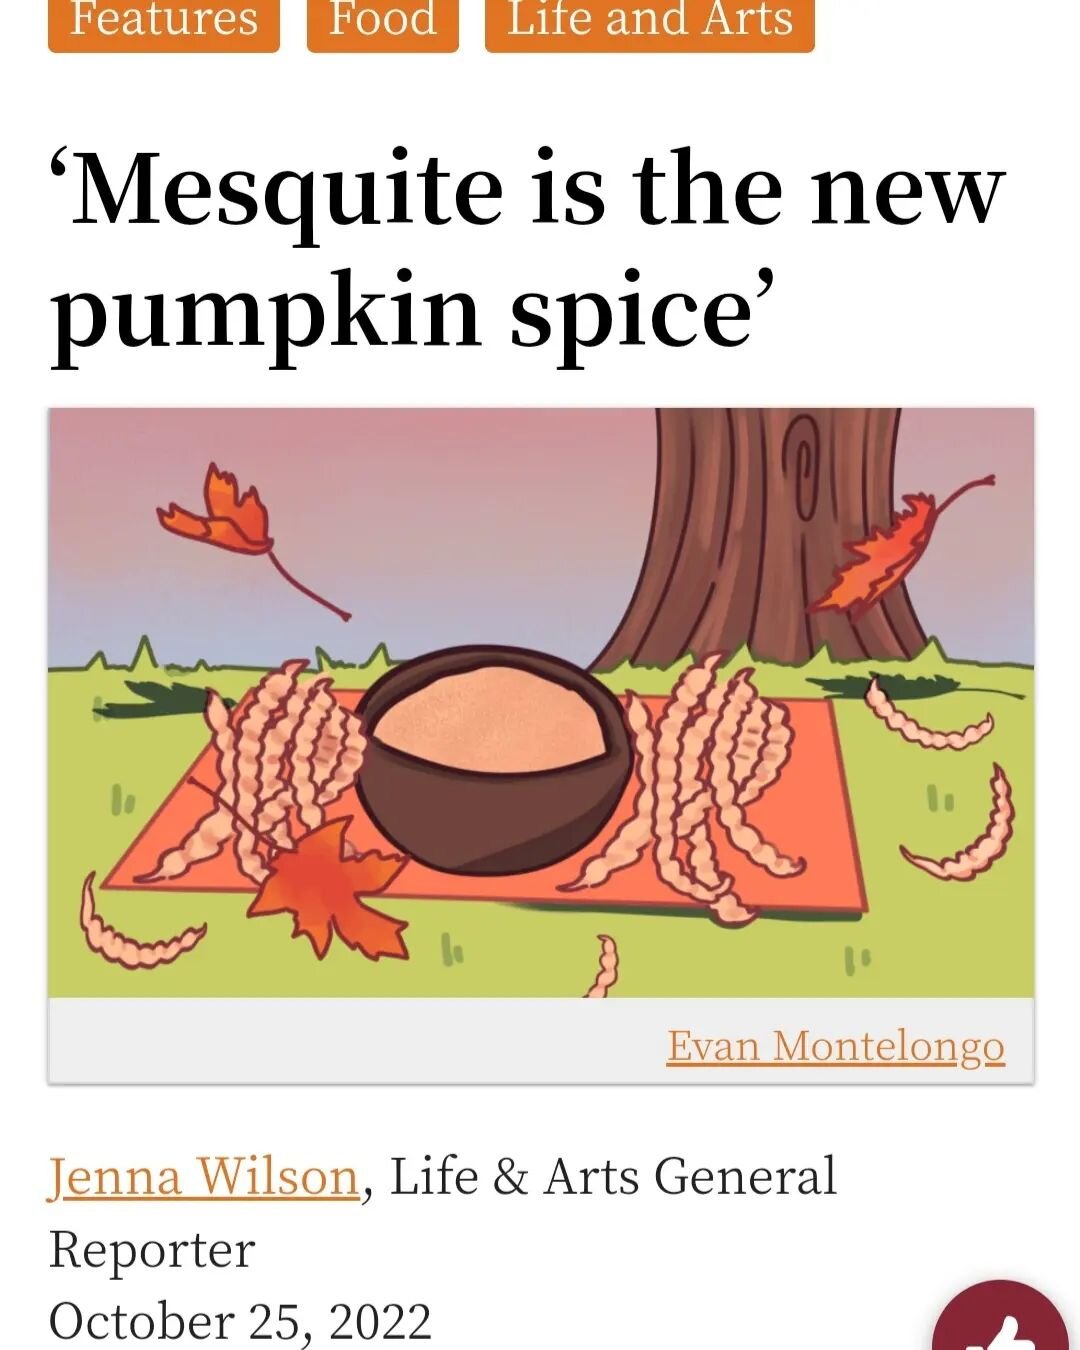 Check out this article in @thedailytexan by @jenna.paige.wilson on Mesquite.  It includes interview comments from @michebreadaustin, @andresmgarza, and @mccartylandfarms. https://thedailytexan.com/2022/10/25/mesquite-is-the-new-pumpkin-spice/ 
#mesqu